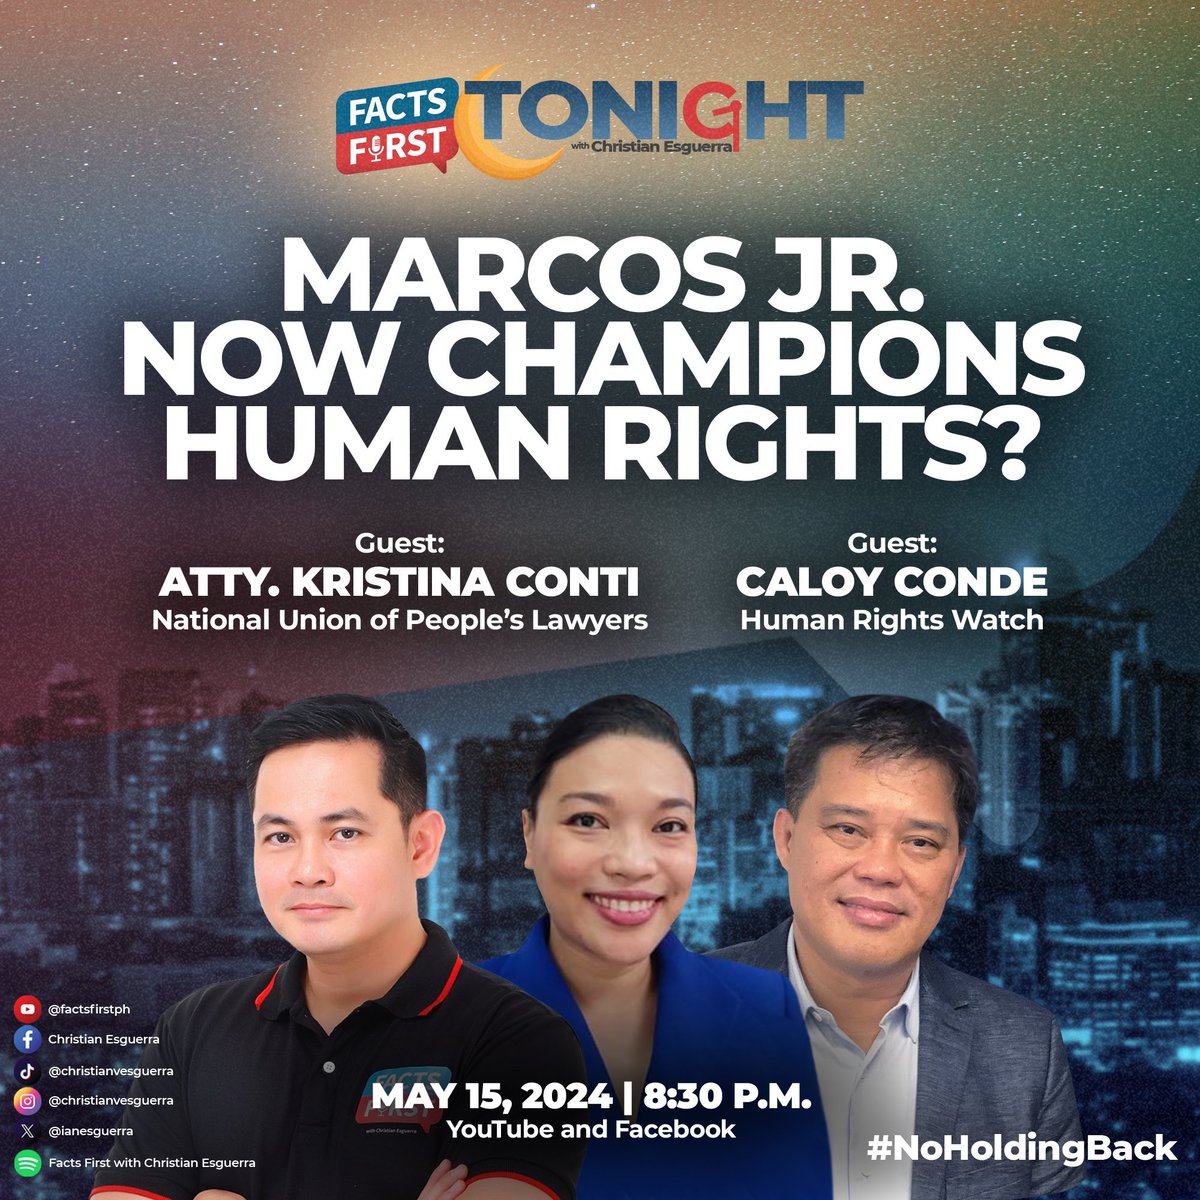 At 8:30 tonight, @IanEsguerra, @chronikrissys, and I will talk about the human rights “super body” created by President Marcos Jr. #factsfirst

Watch it here: youtube.com/live/mnL0UgkV-…